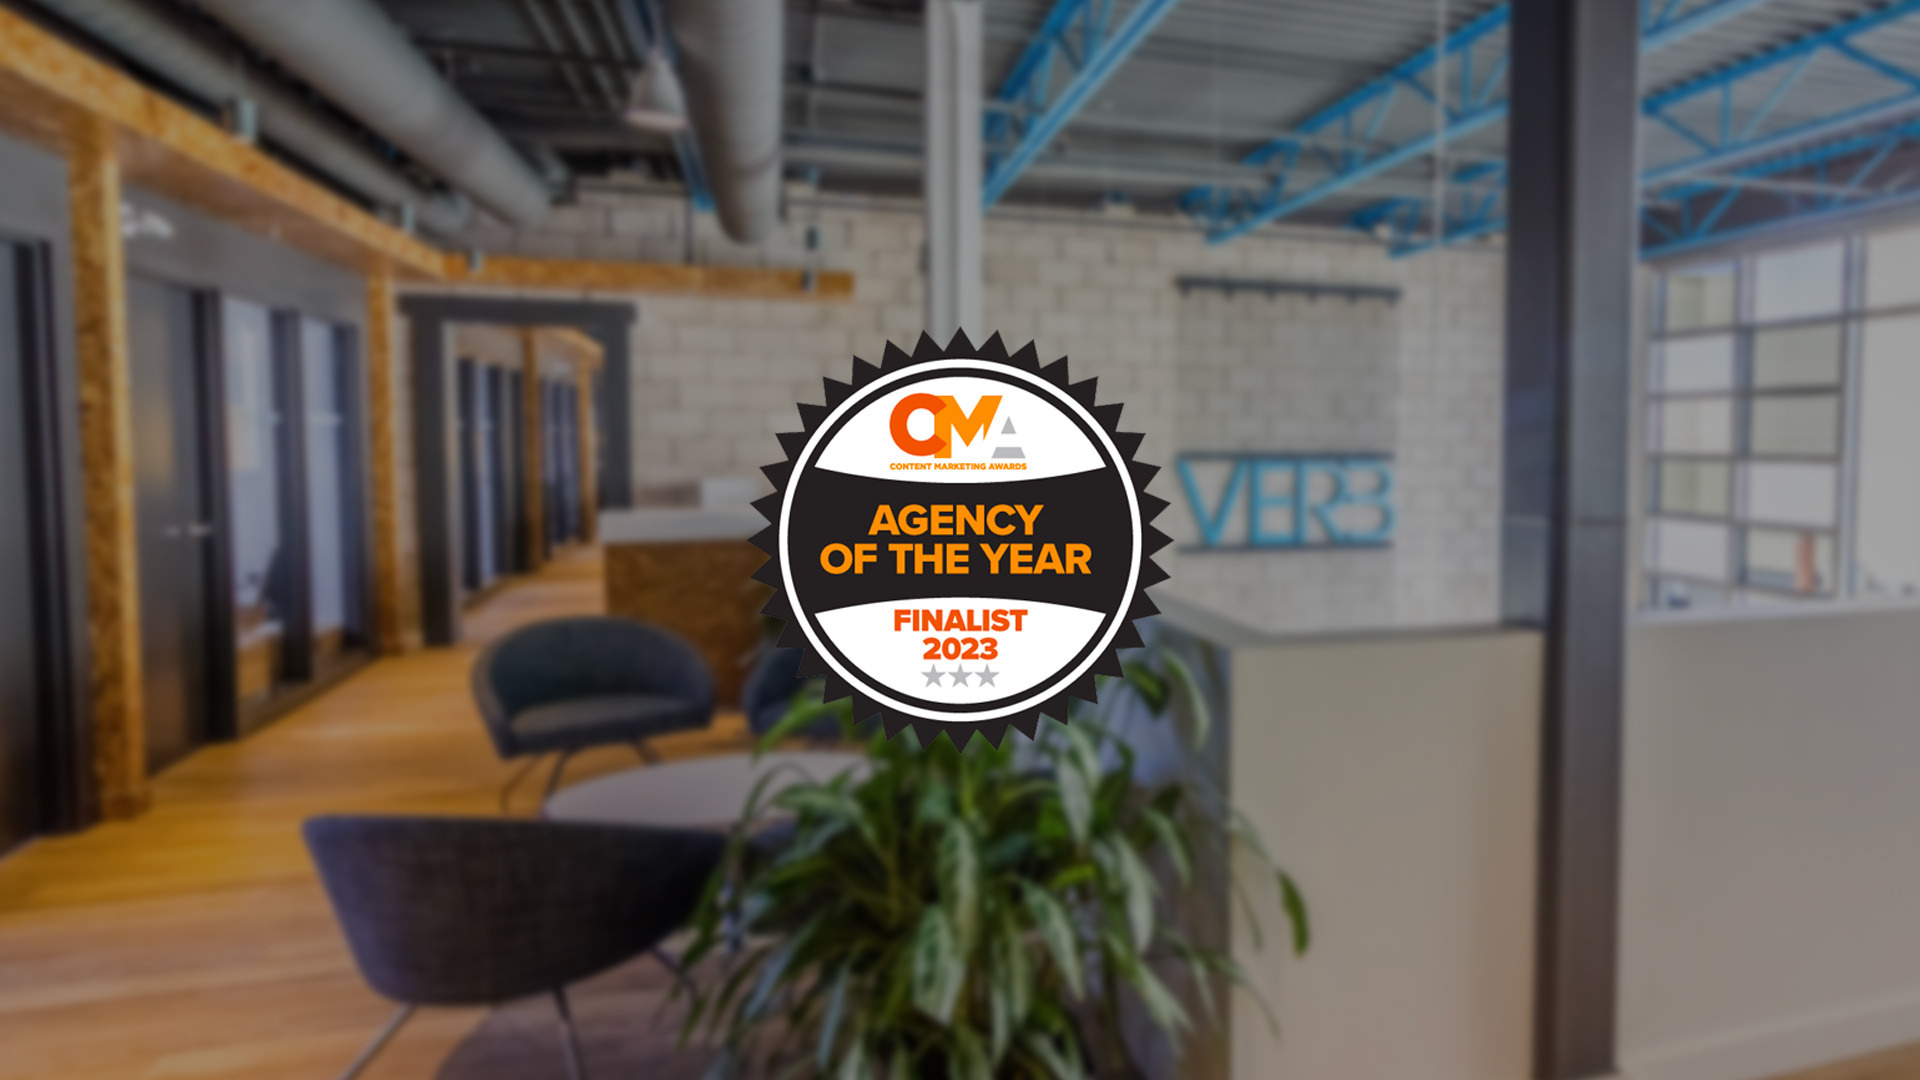 Content Marketing Awards - Agency of the year - Finalist 2023